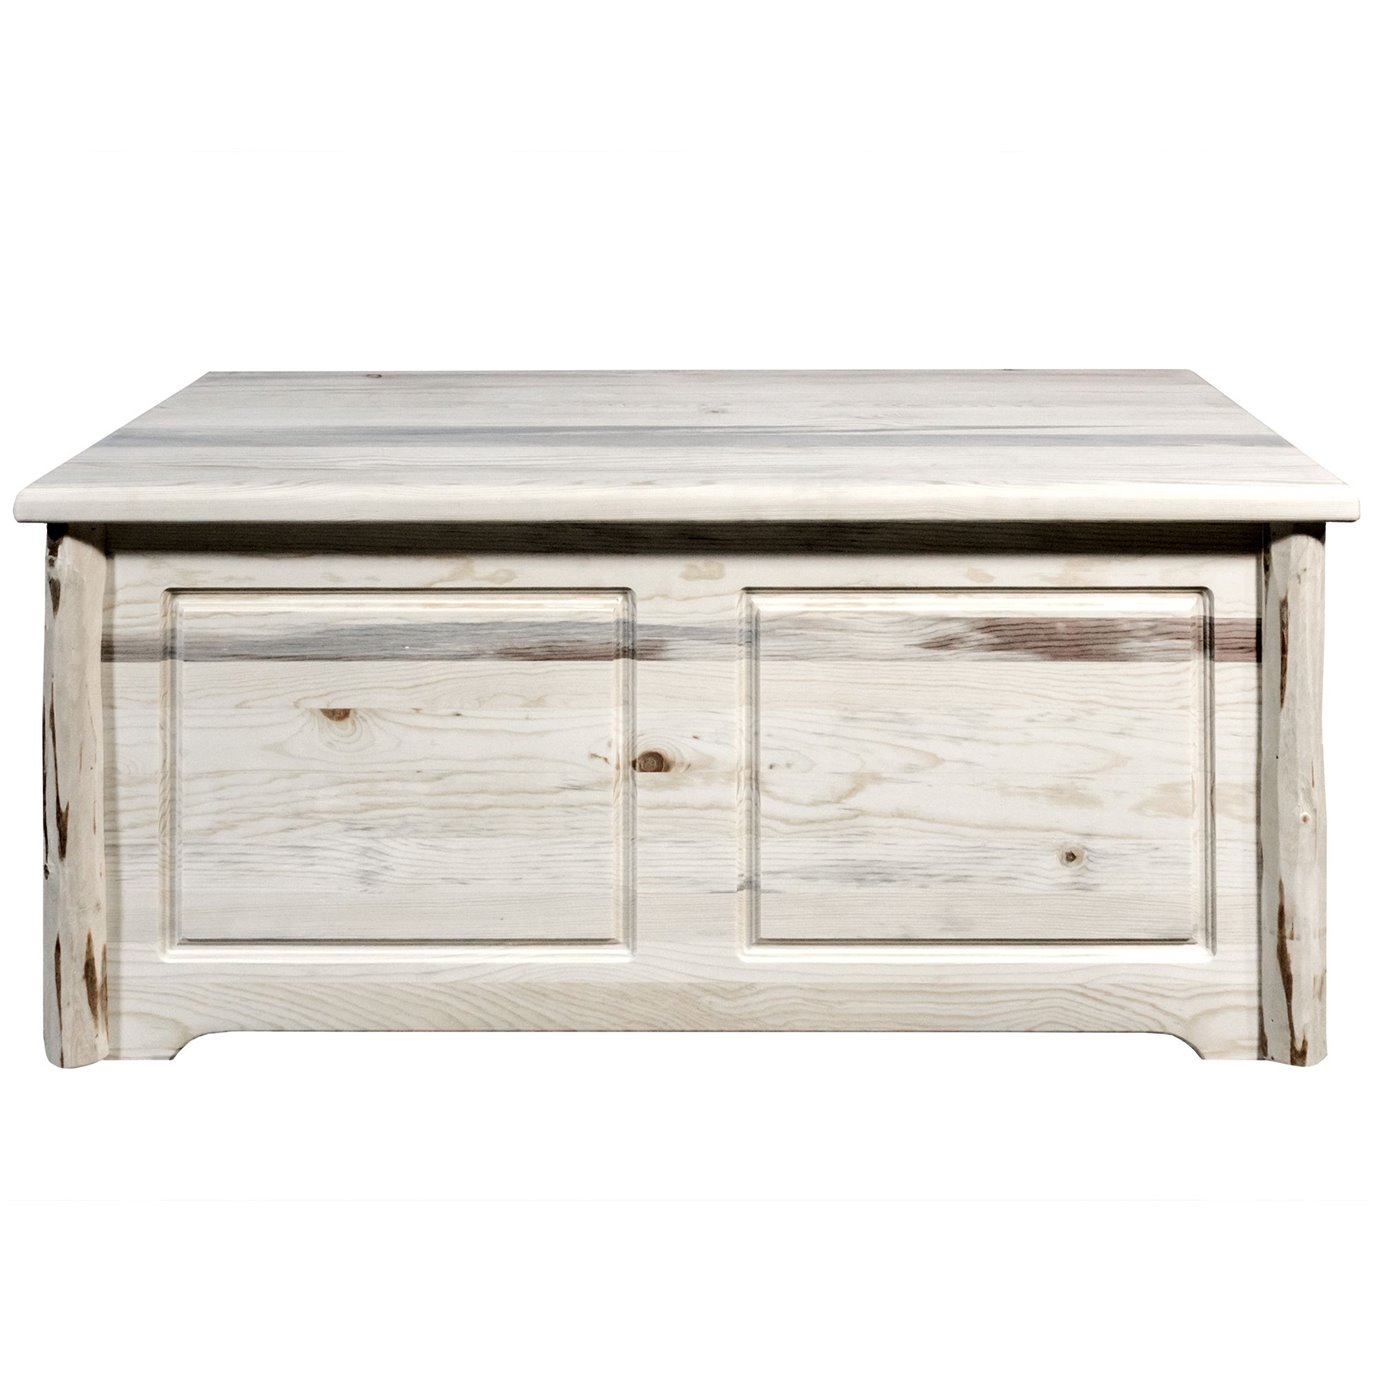 Montana Small Blanket Chest - Clear Lacquer Finish